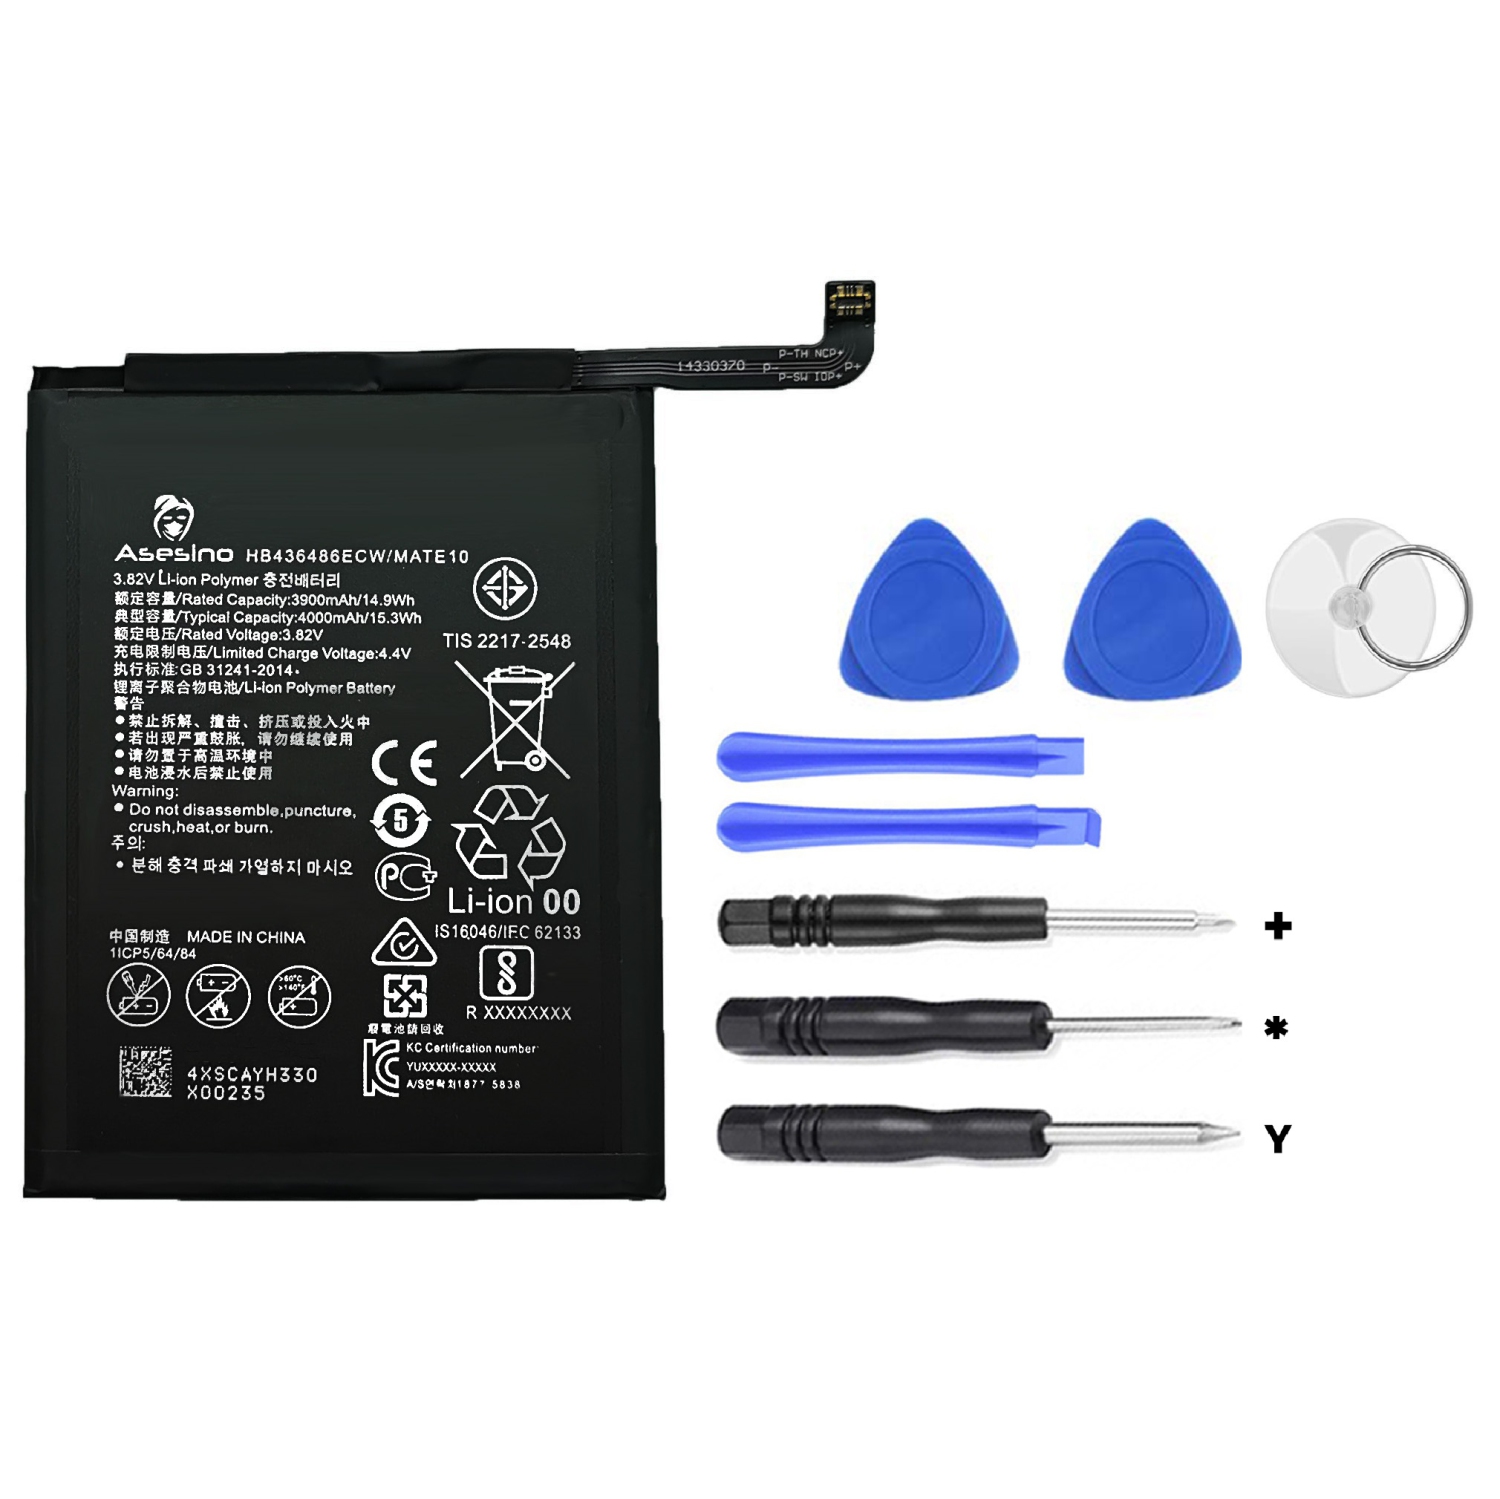 Asesino Replacement Huawei Mate 10/Mate 10 Pro/P20 Pro Battery (HB436486ECW) with Toolkit